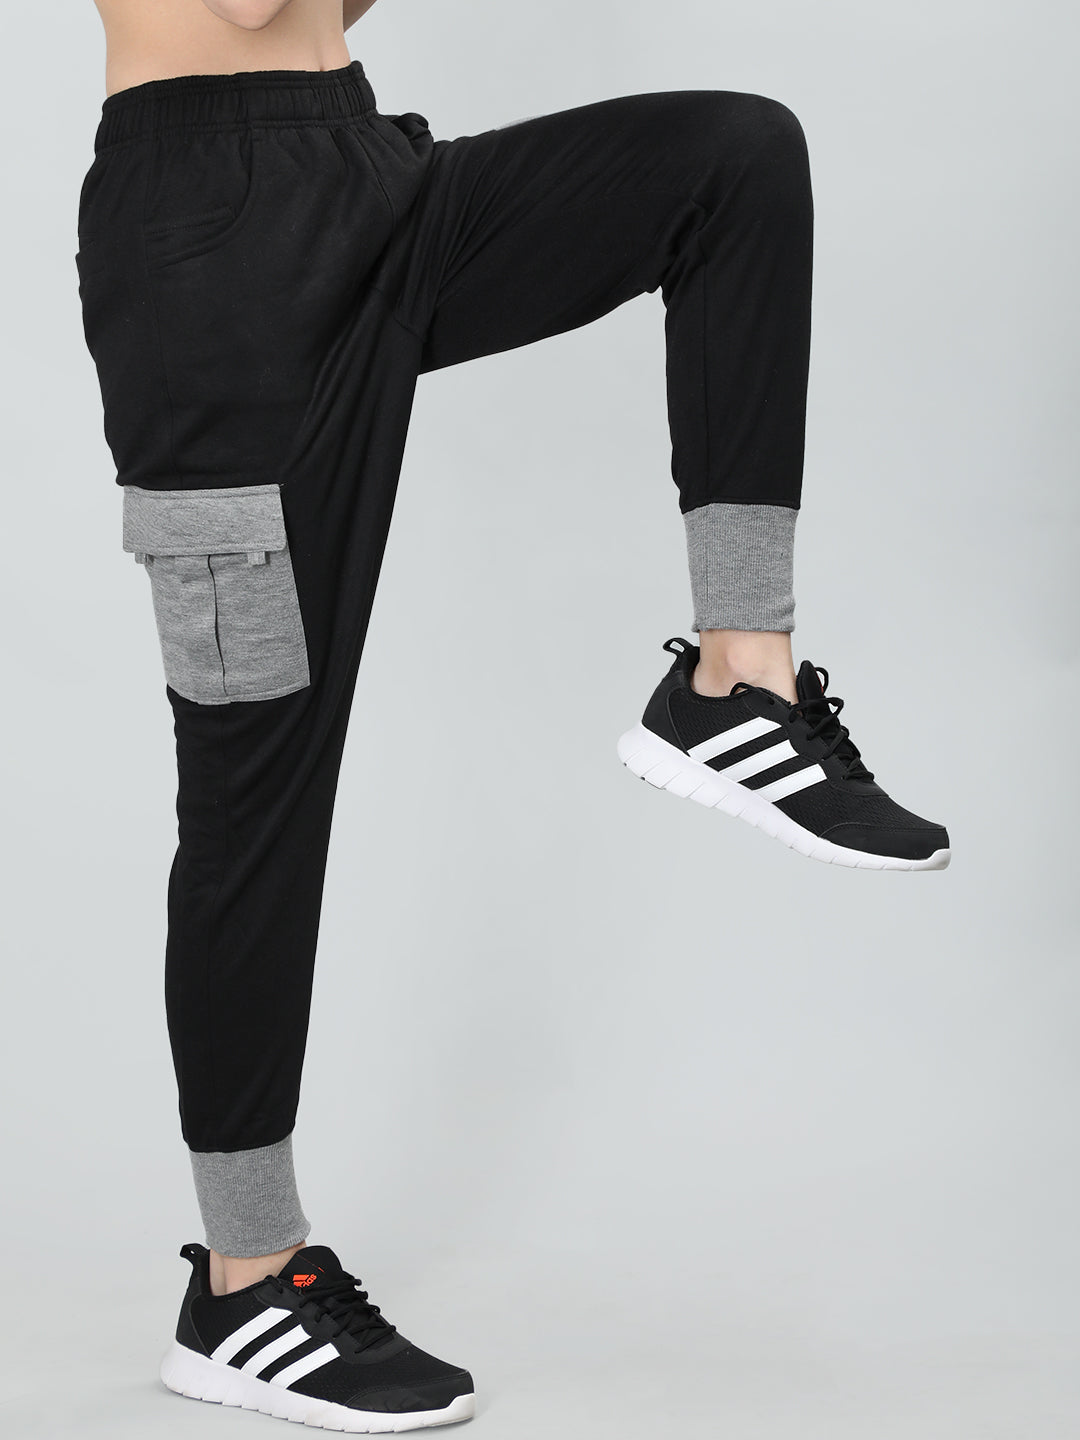 Women's Gym Workout Sports Trackpant